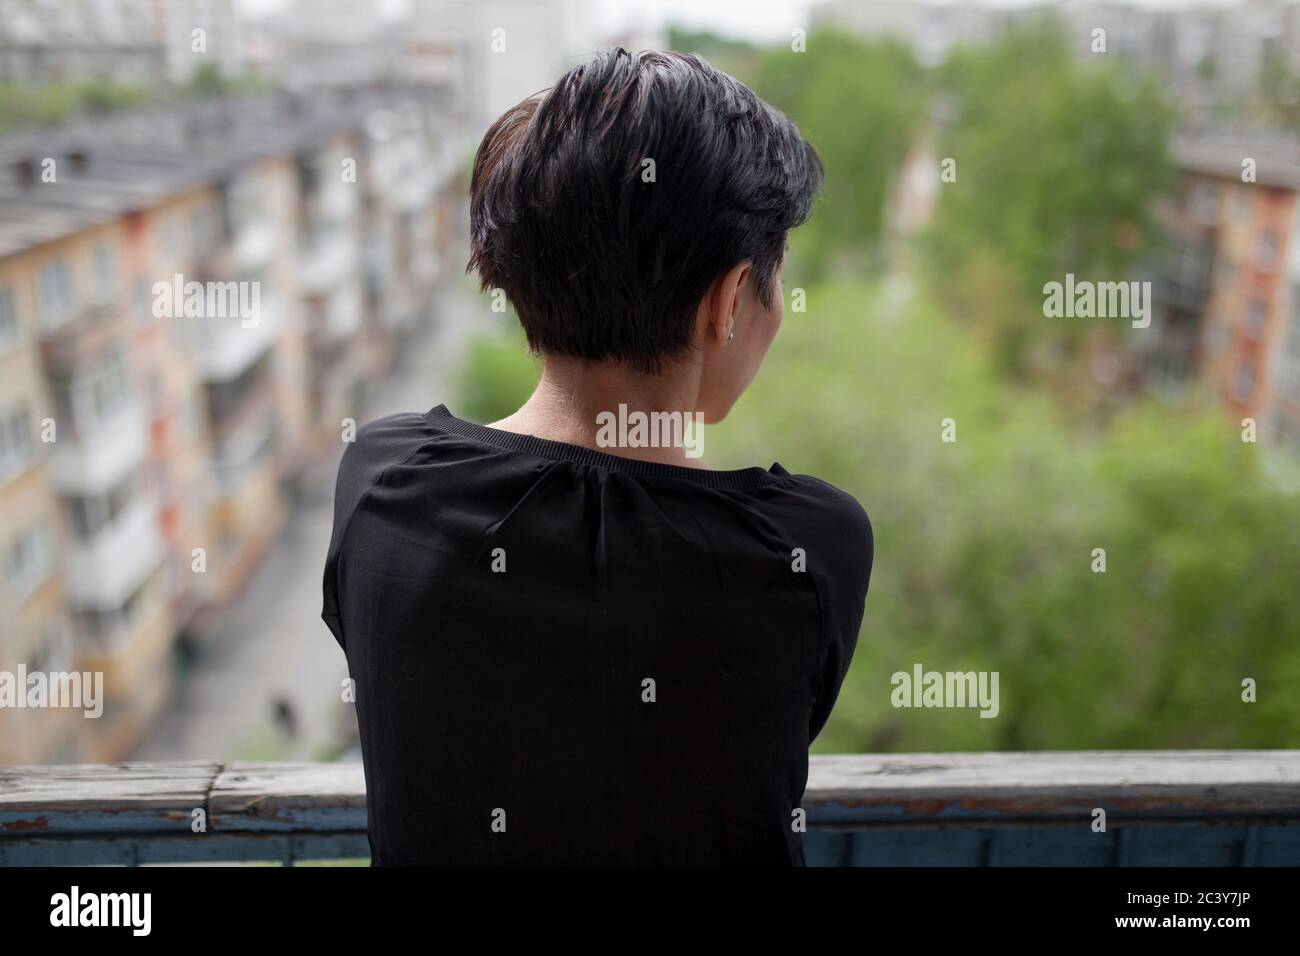 Rear view of woman on balcony Stock Photo